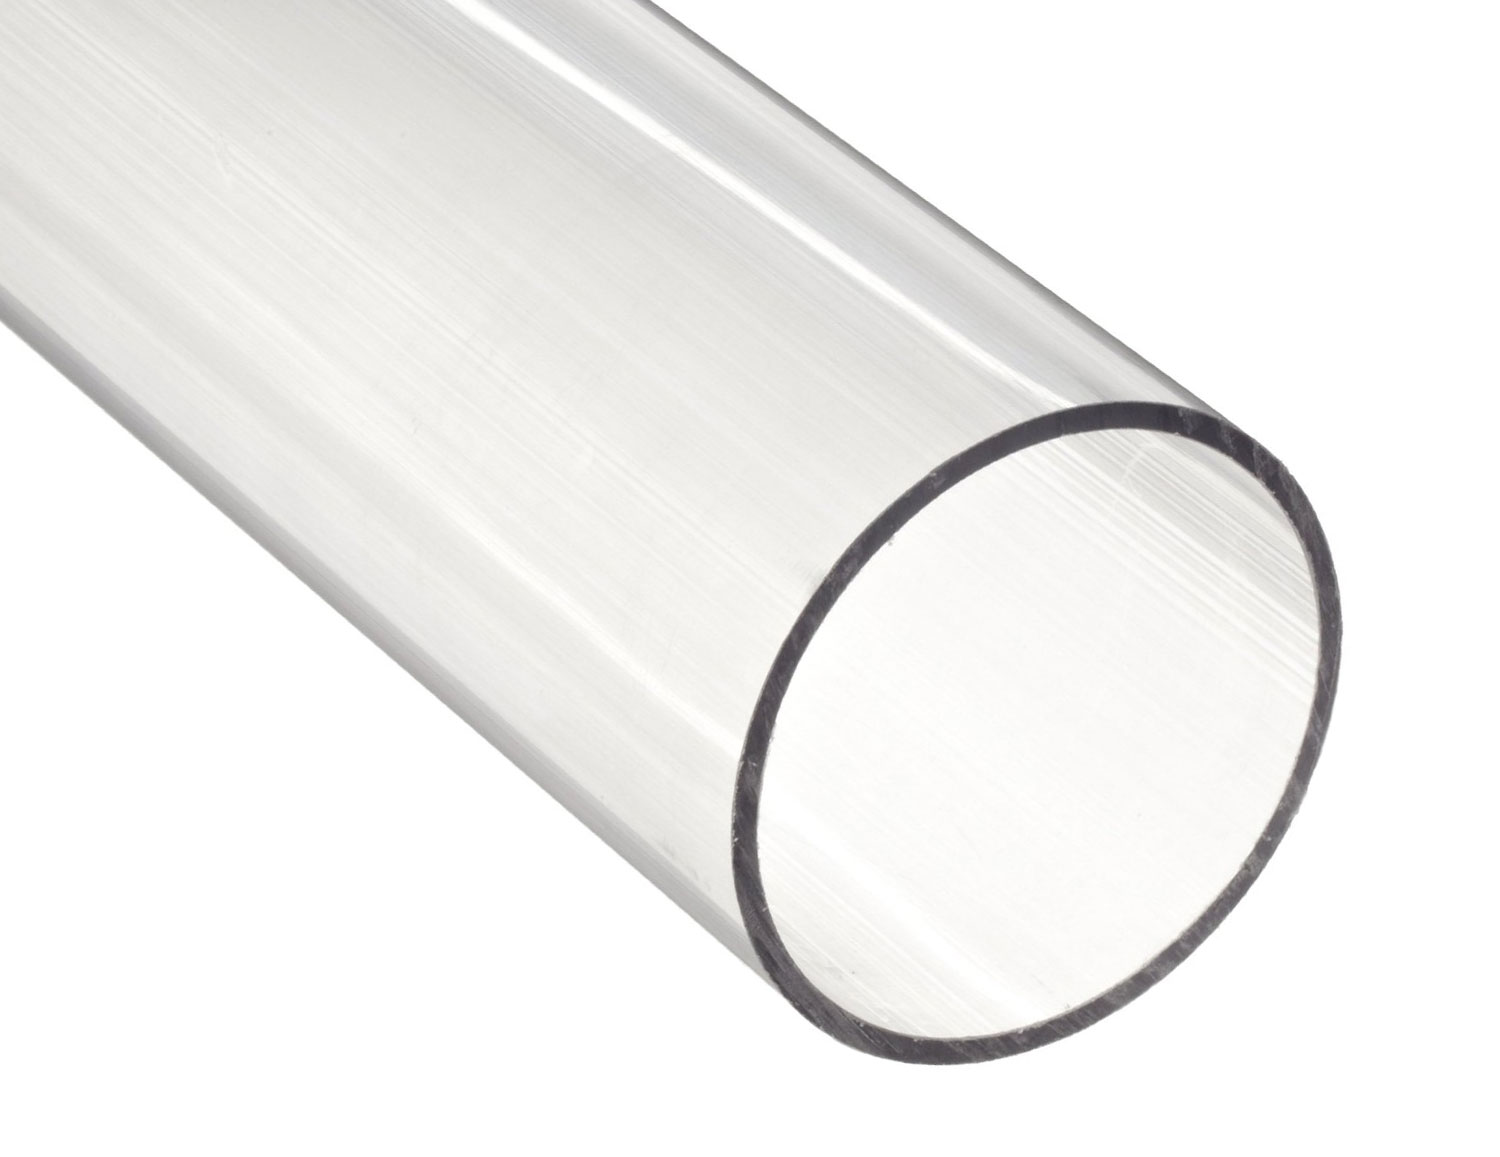 1Ft IDx6mm Length Plastic Tube sourcing map Polycarbonate Rigid Round Clear Tubing 4mm ODx305mm 0.23 Inch 0.16 Inch 